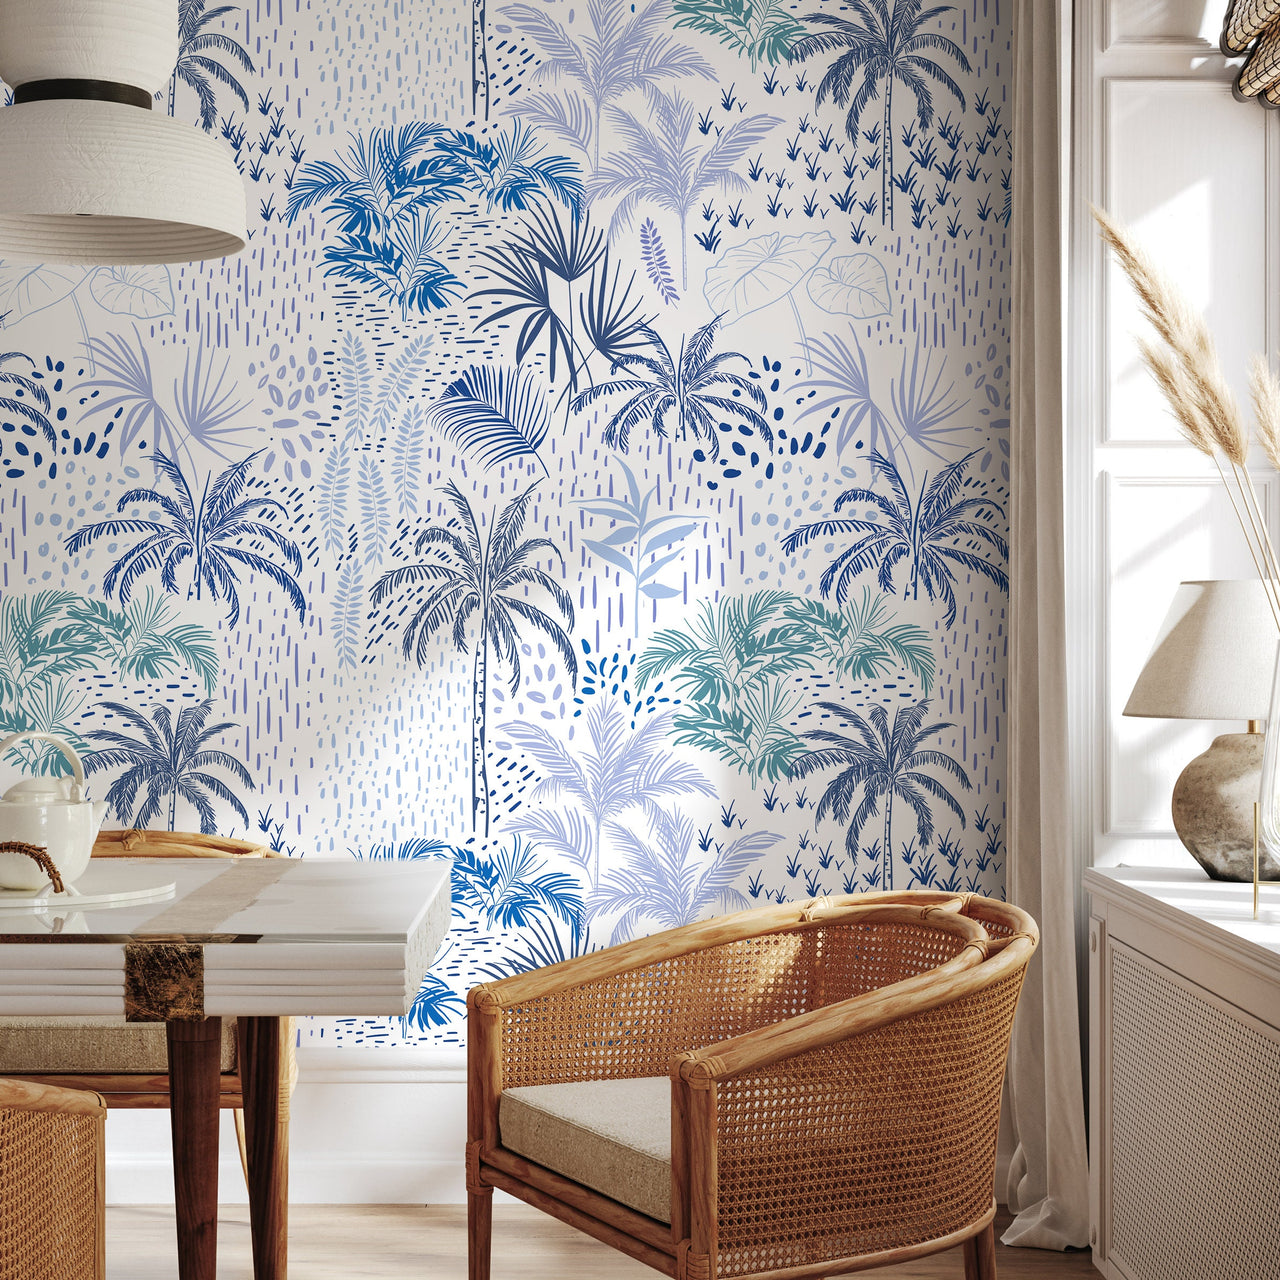 Wallpaper Peel and Stick Wallpaper Removable Wallpaper Home Decor Wall Art Wall Decor Room Decor / Blue Tropical Palm Tree Wallpaper - B089